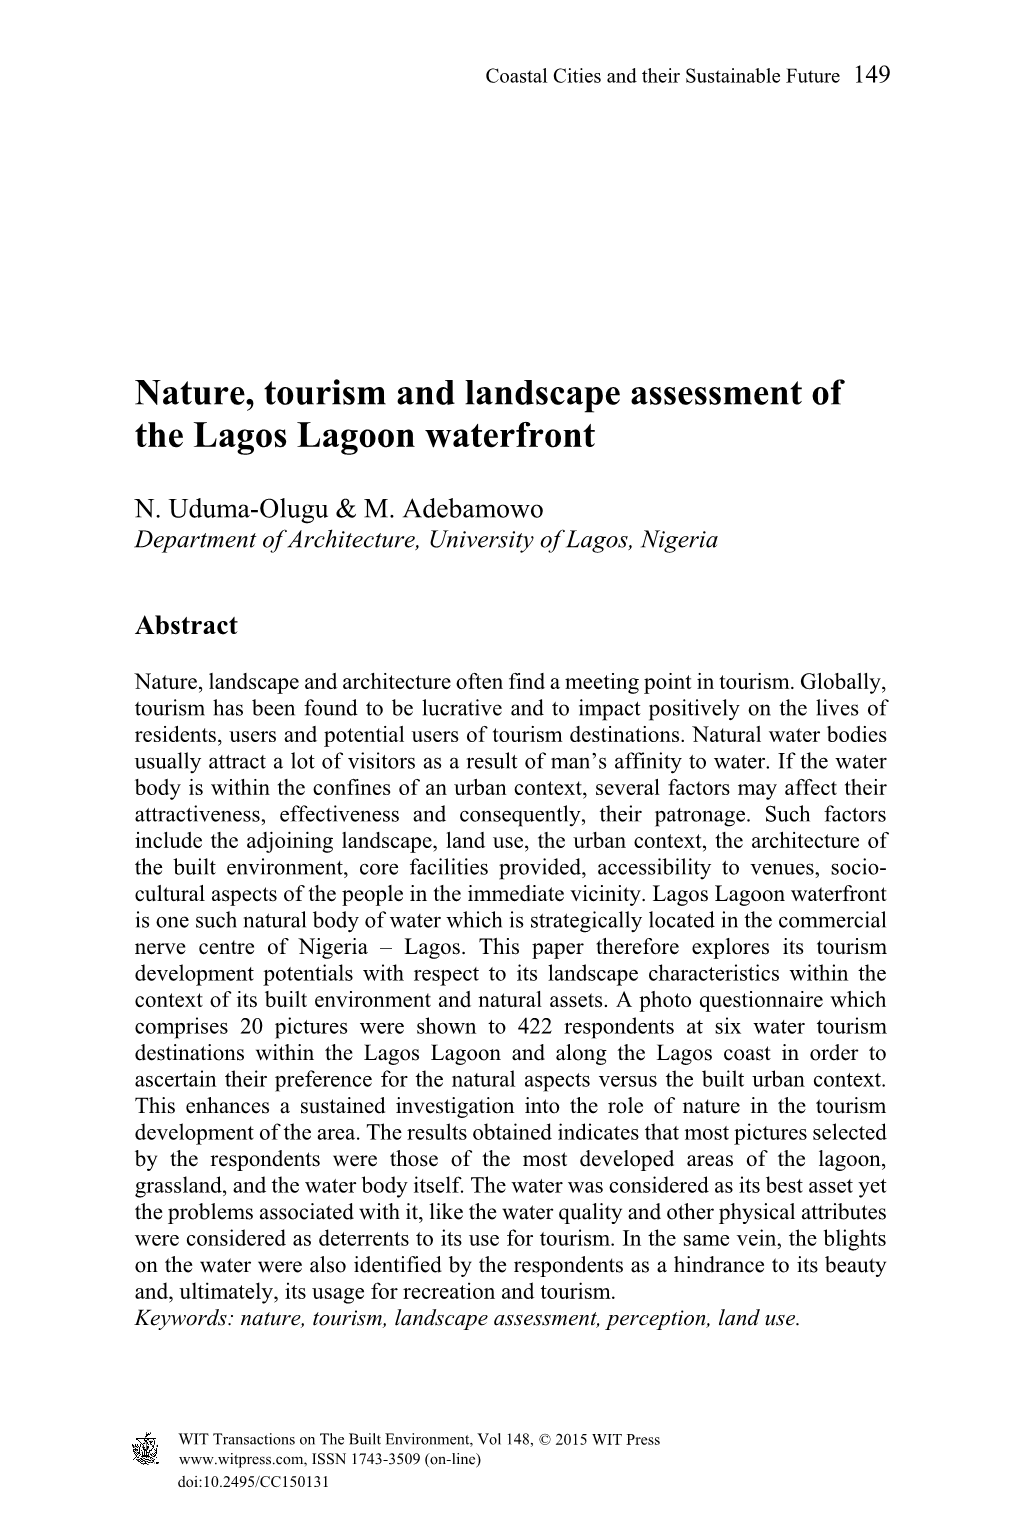 Nature, Tourism and Landscape Assessment of the Lagos Lagoon Waterfront